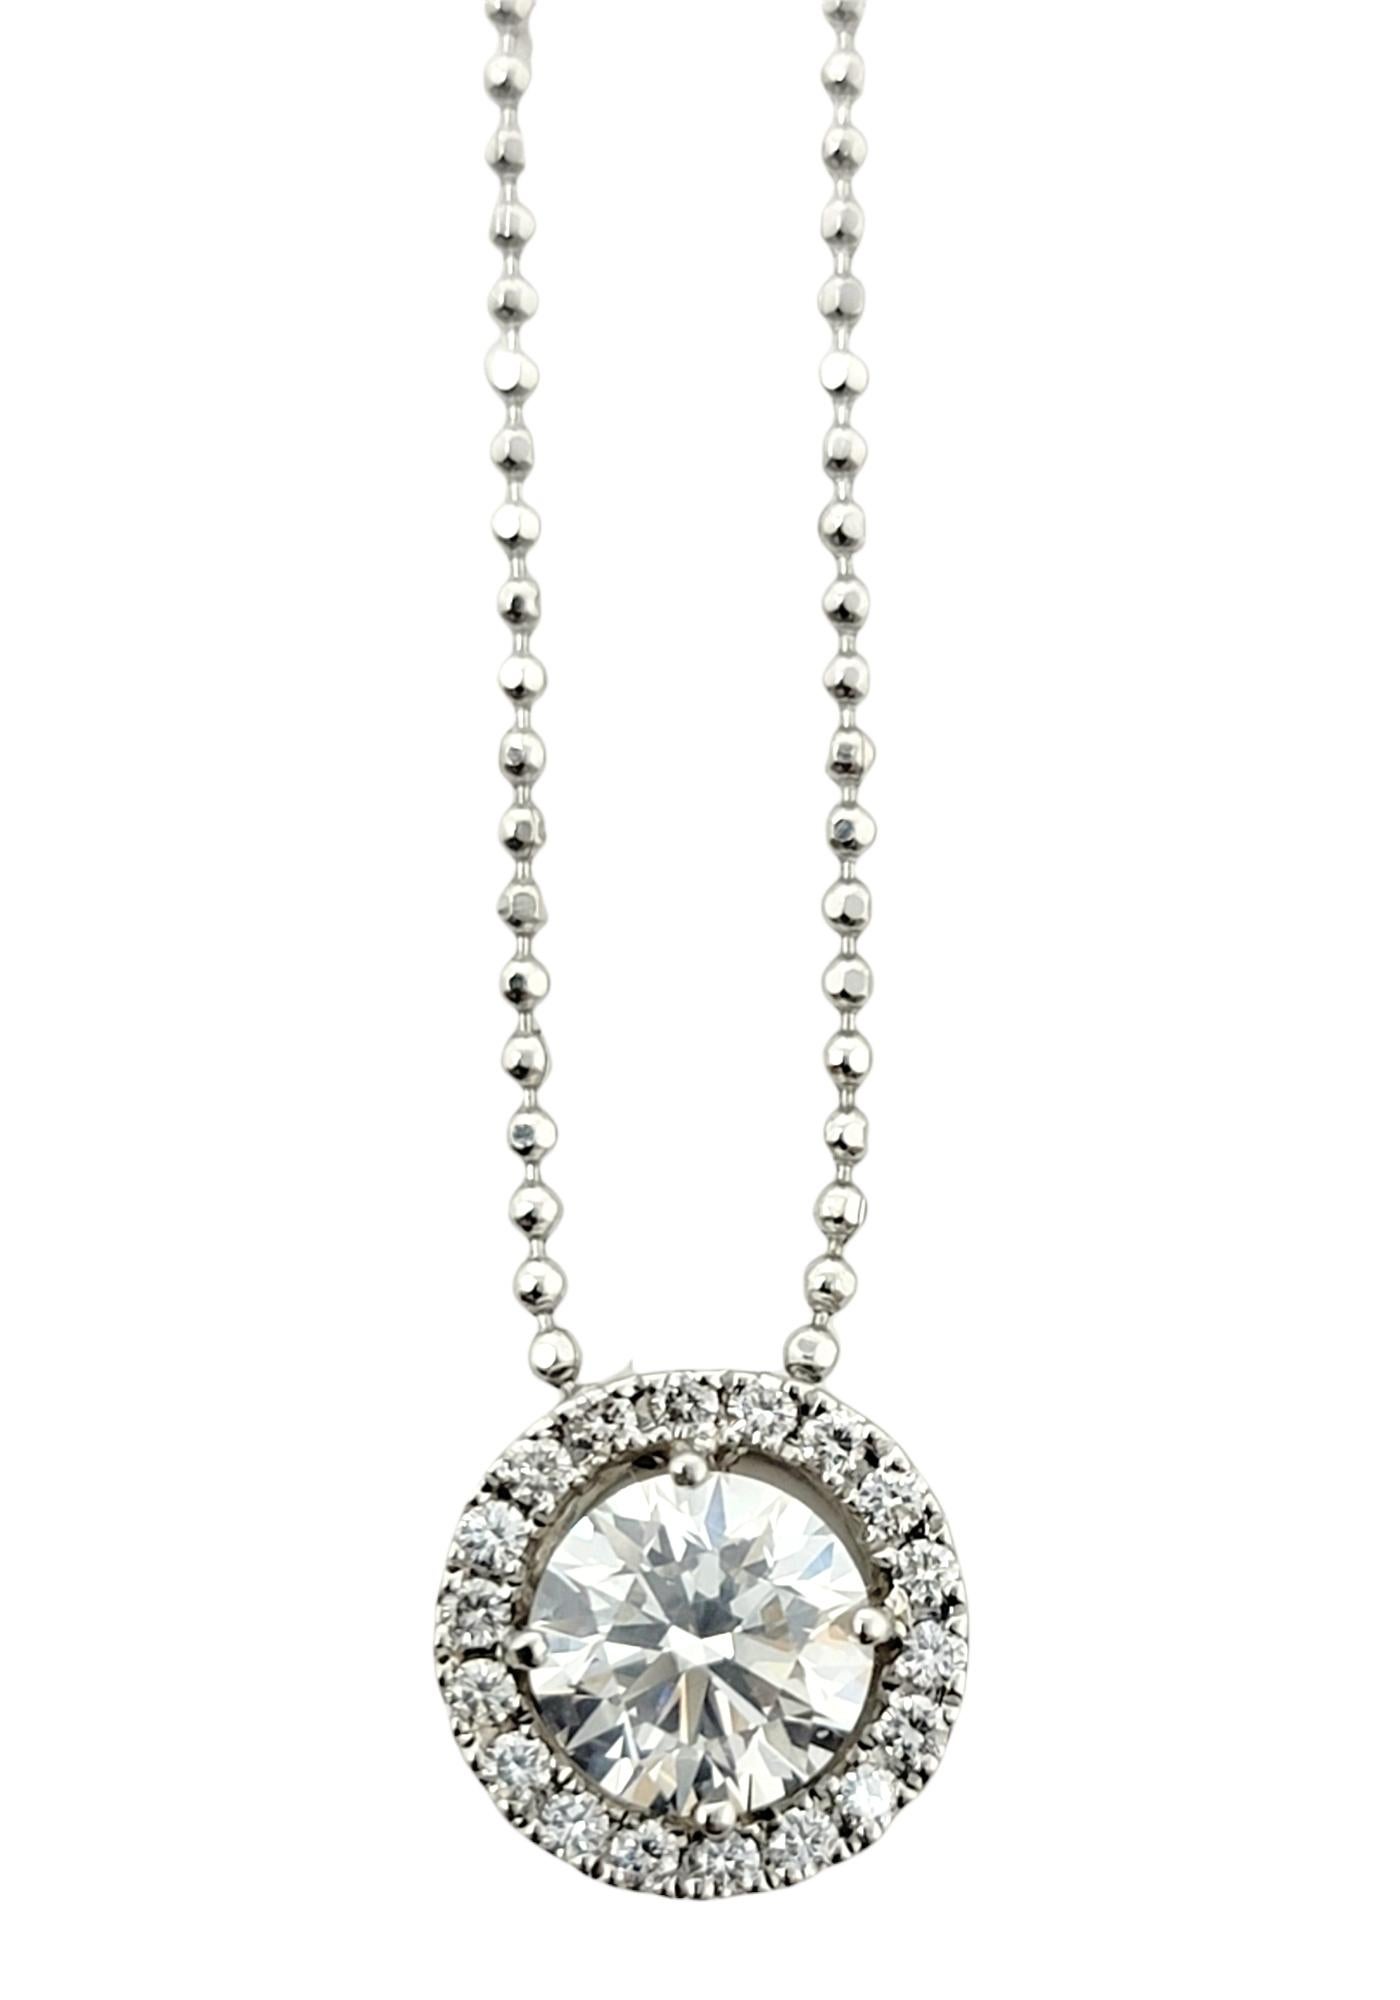 This sparkling diamond halo pendant necklace is stunningly simple, yet undeniably beautiful. The delicate ball chain and icy circle of natural round diamonds goes with just about everything. It features a single round brilliant diamond prong set at